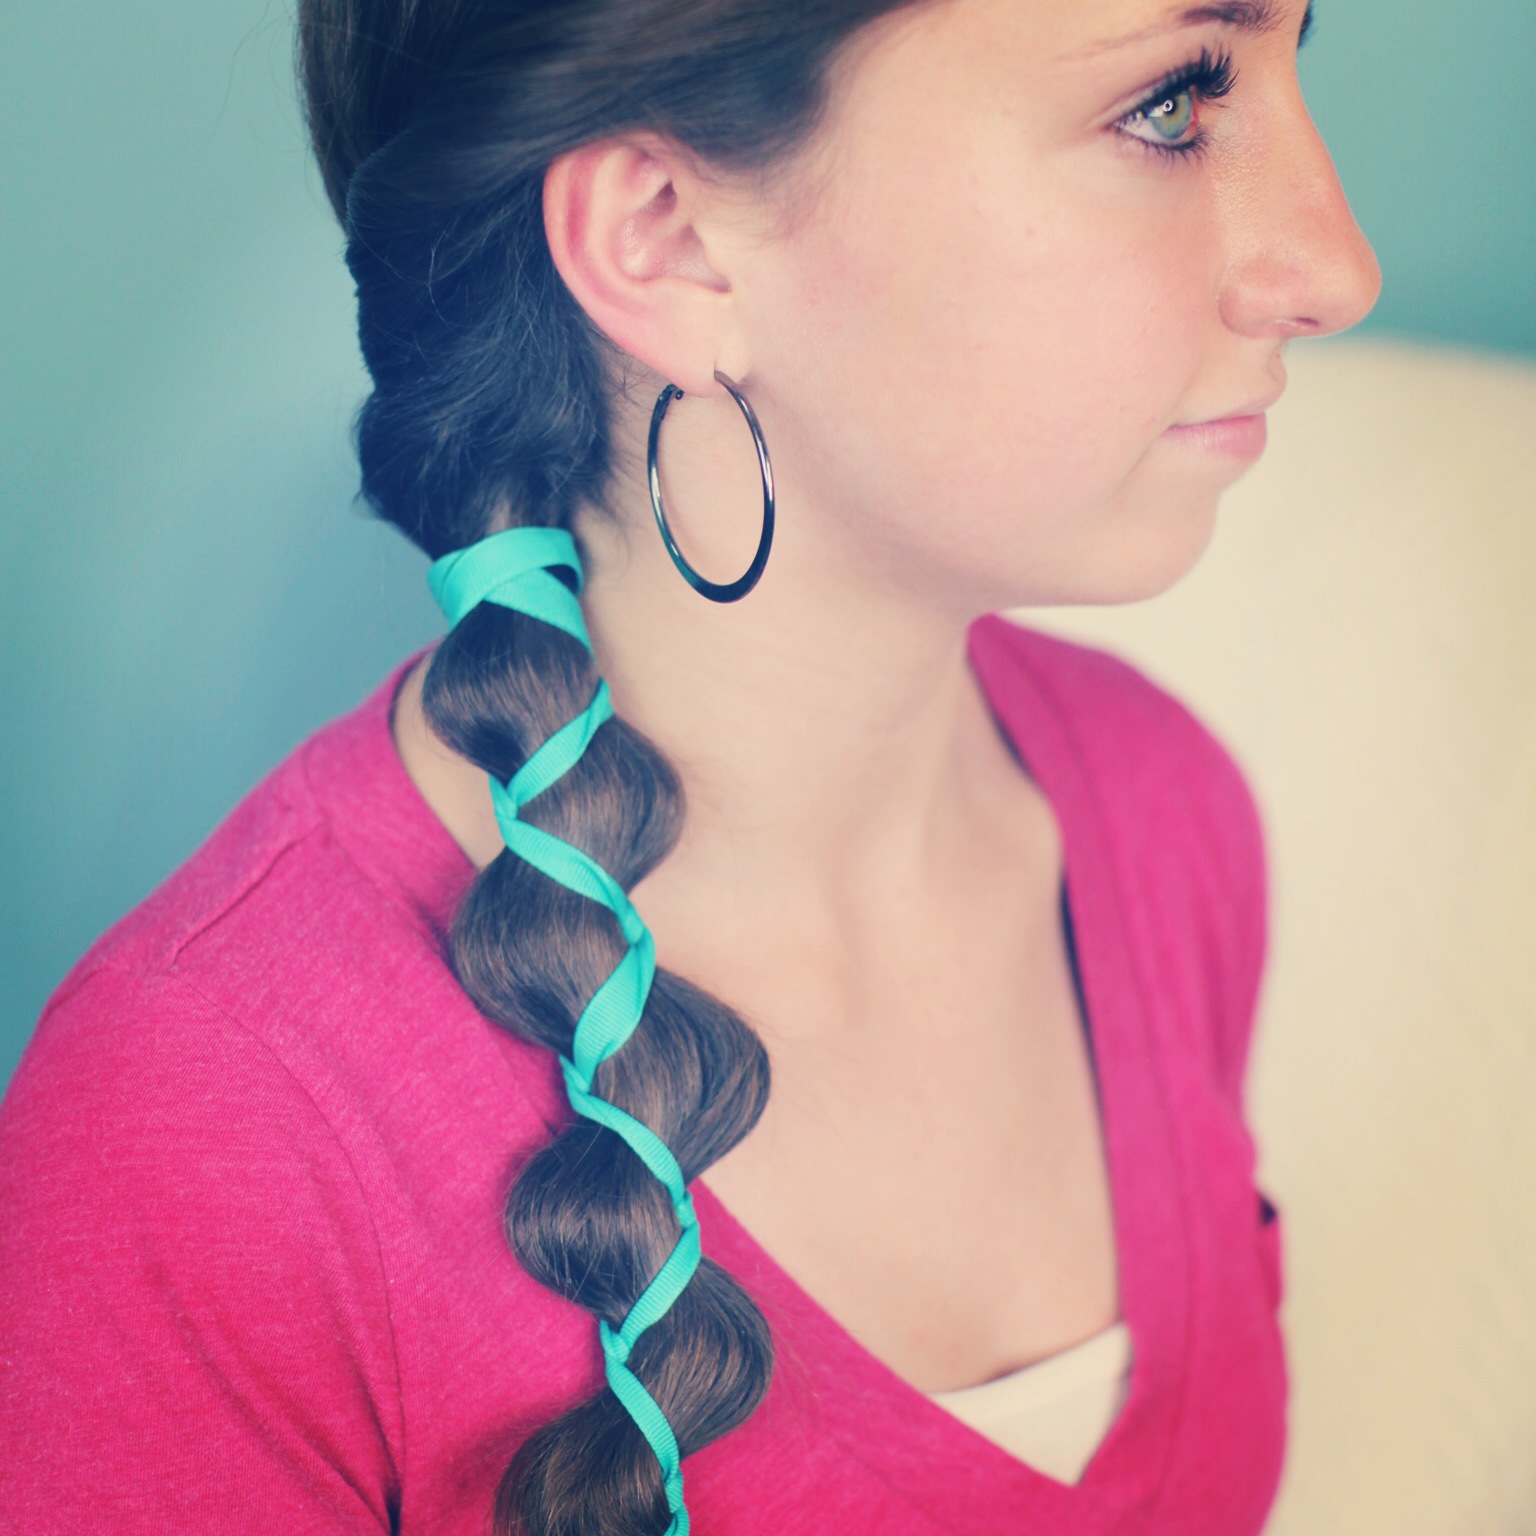 Ribbon-Accented Loony Braid | Hairstyle Ideas - Cute Girls Hairstyles